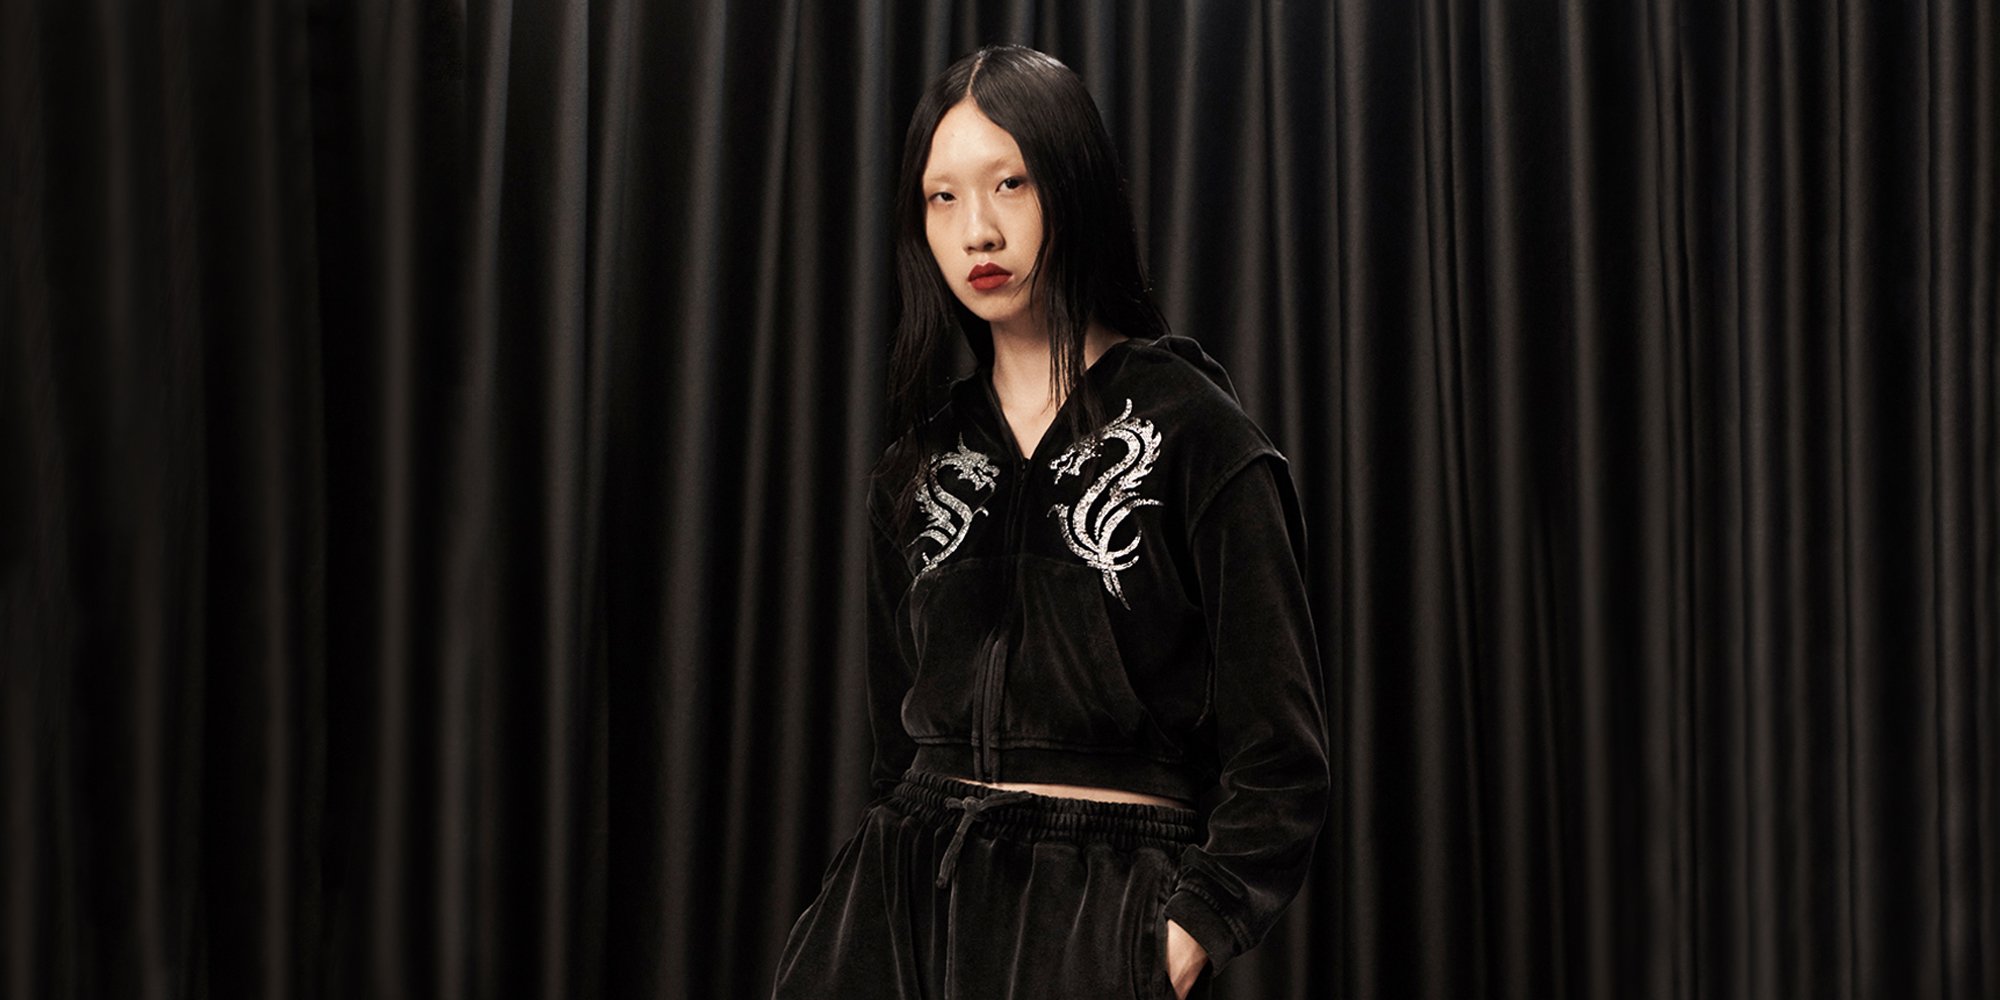 ALEXANDER WANG 2024 LUNAR NEW YEAR CAPSULE COLLECTION